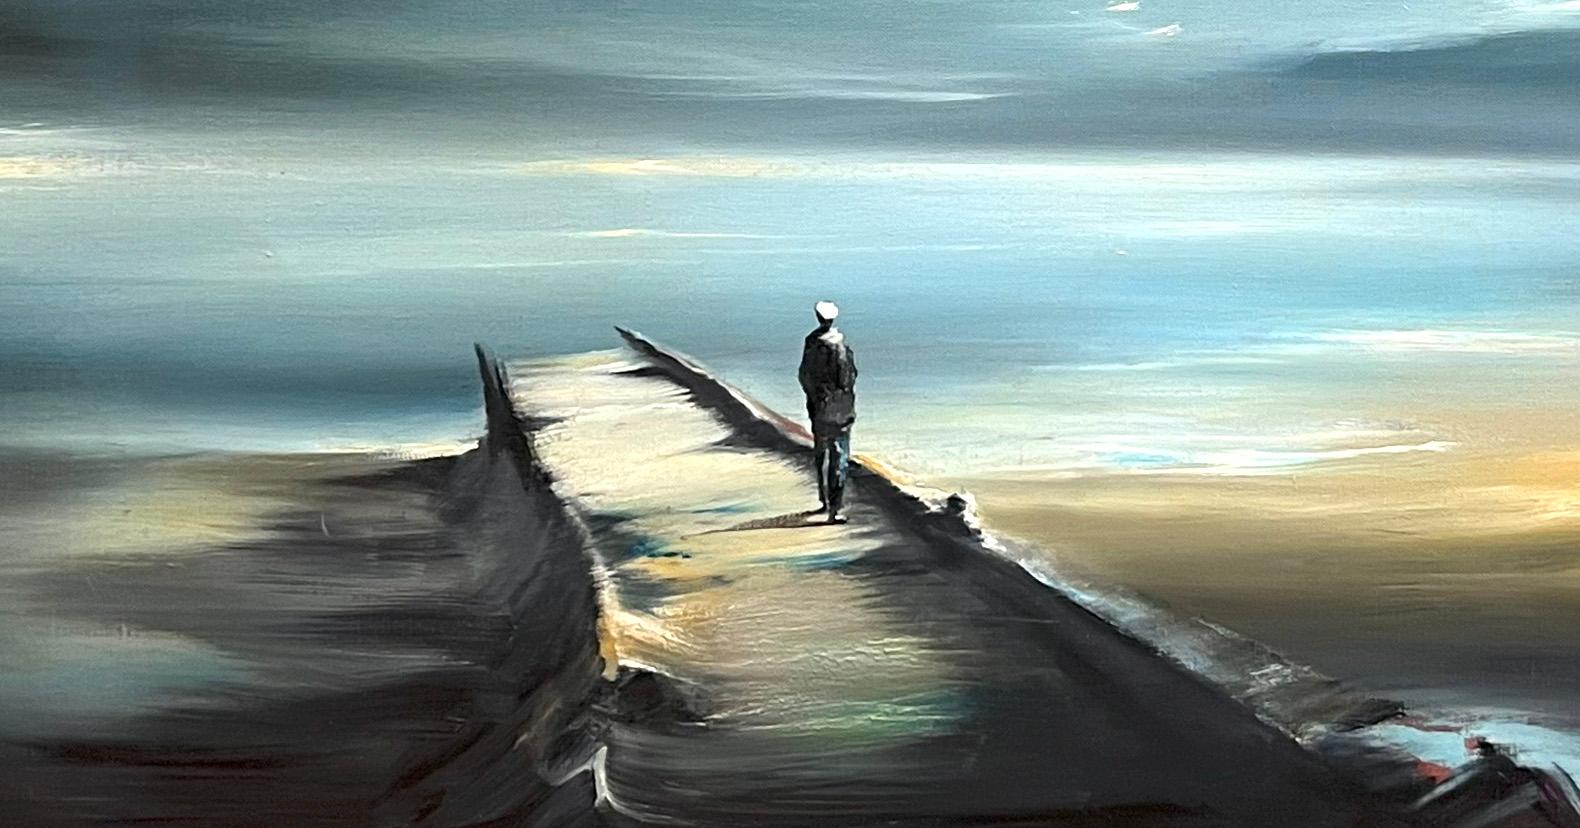 Seascape  Original oil painting on Linen 1956
Solitary figure on wharf by California artist Robert Watson, painted 1956 (1923 - 2004)The following, is from Tony Watson, son of the artist who wrote and was published in the San Francisco Chronicle.